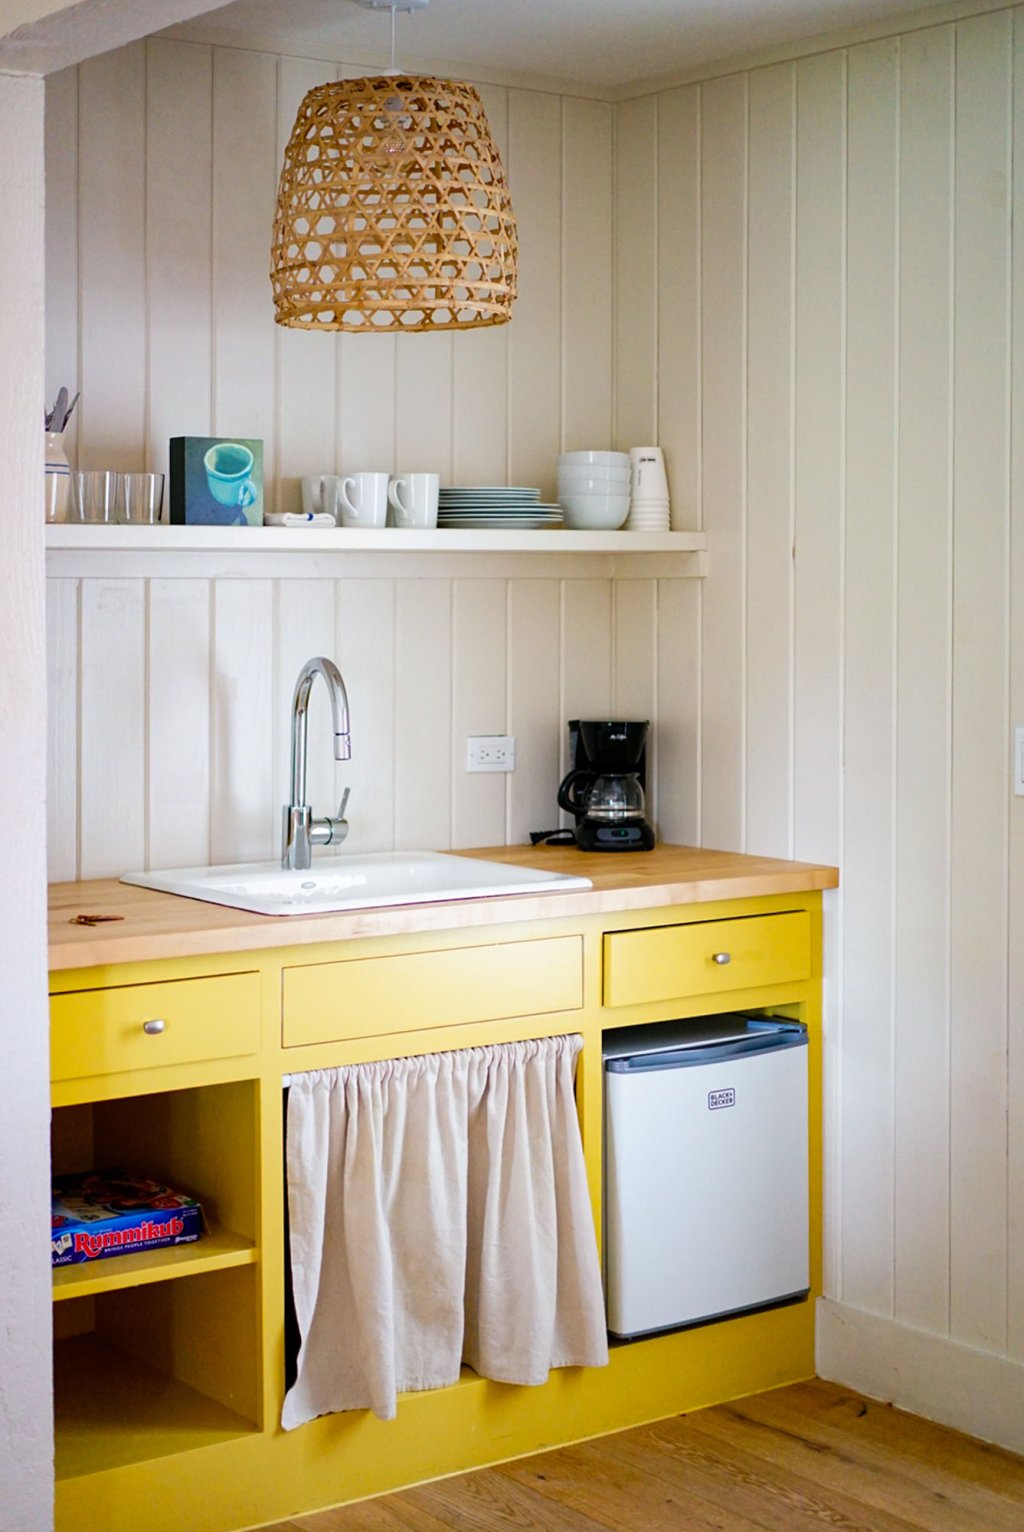 Kitchen sink with yellow countertops.